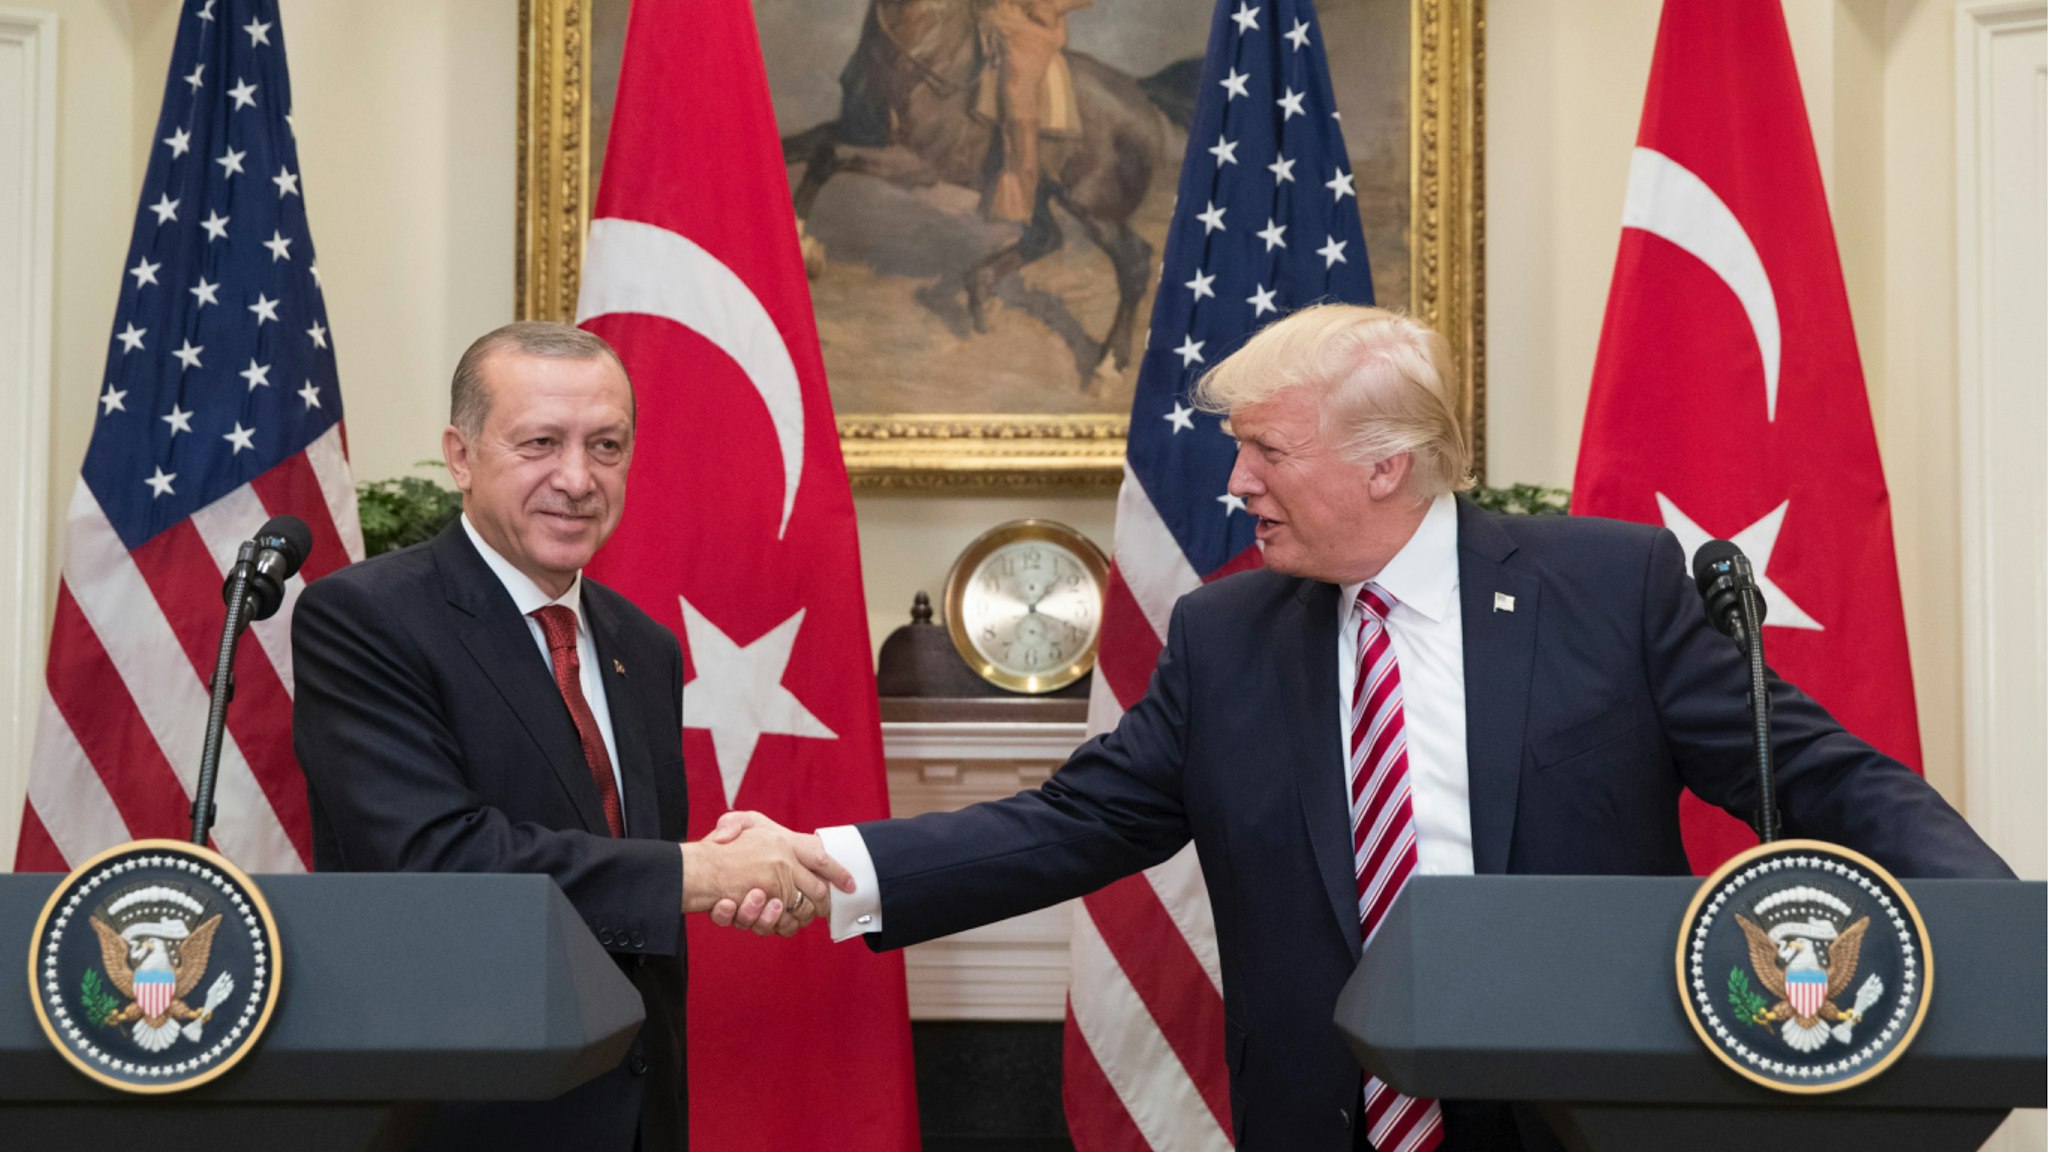 US President Donald Trump (R) shakes hands with President of Turkey Recep Tayyip Erdogan (L) in the Roosevelt Room where they issued a joint statement following their meeting at the White House on May 16, 2017 in Washington, DC.